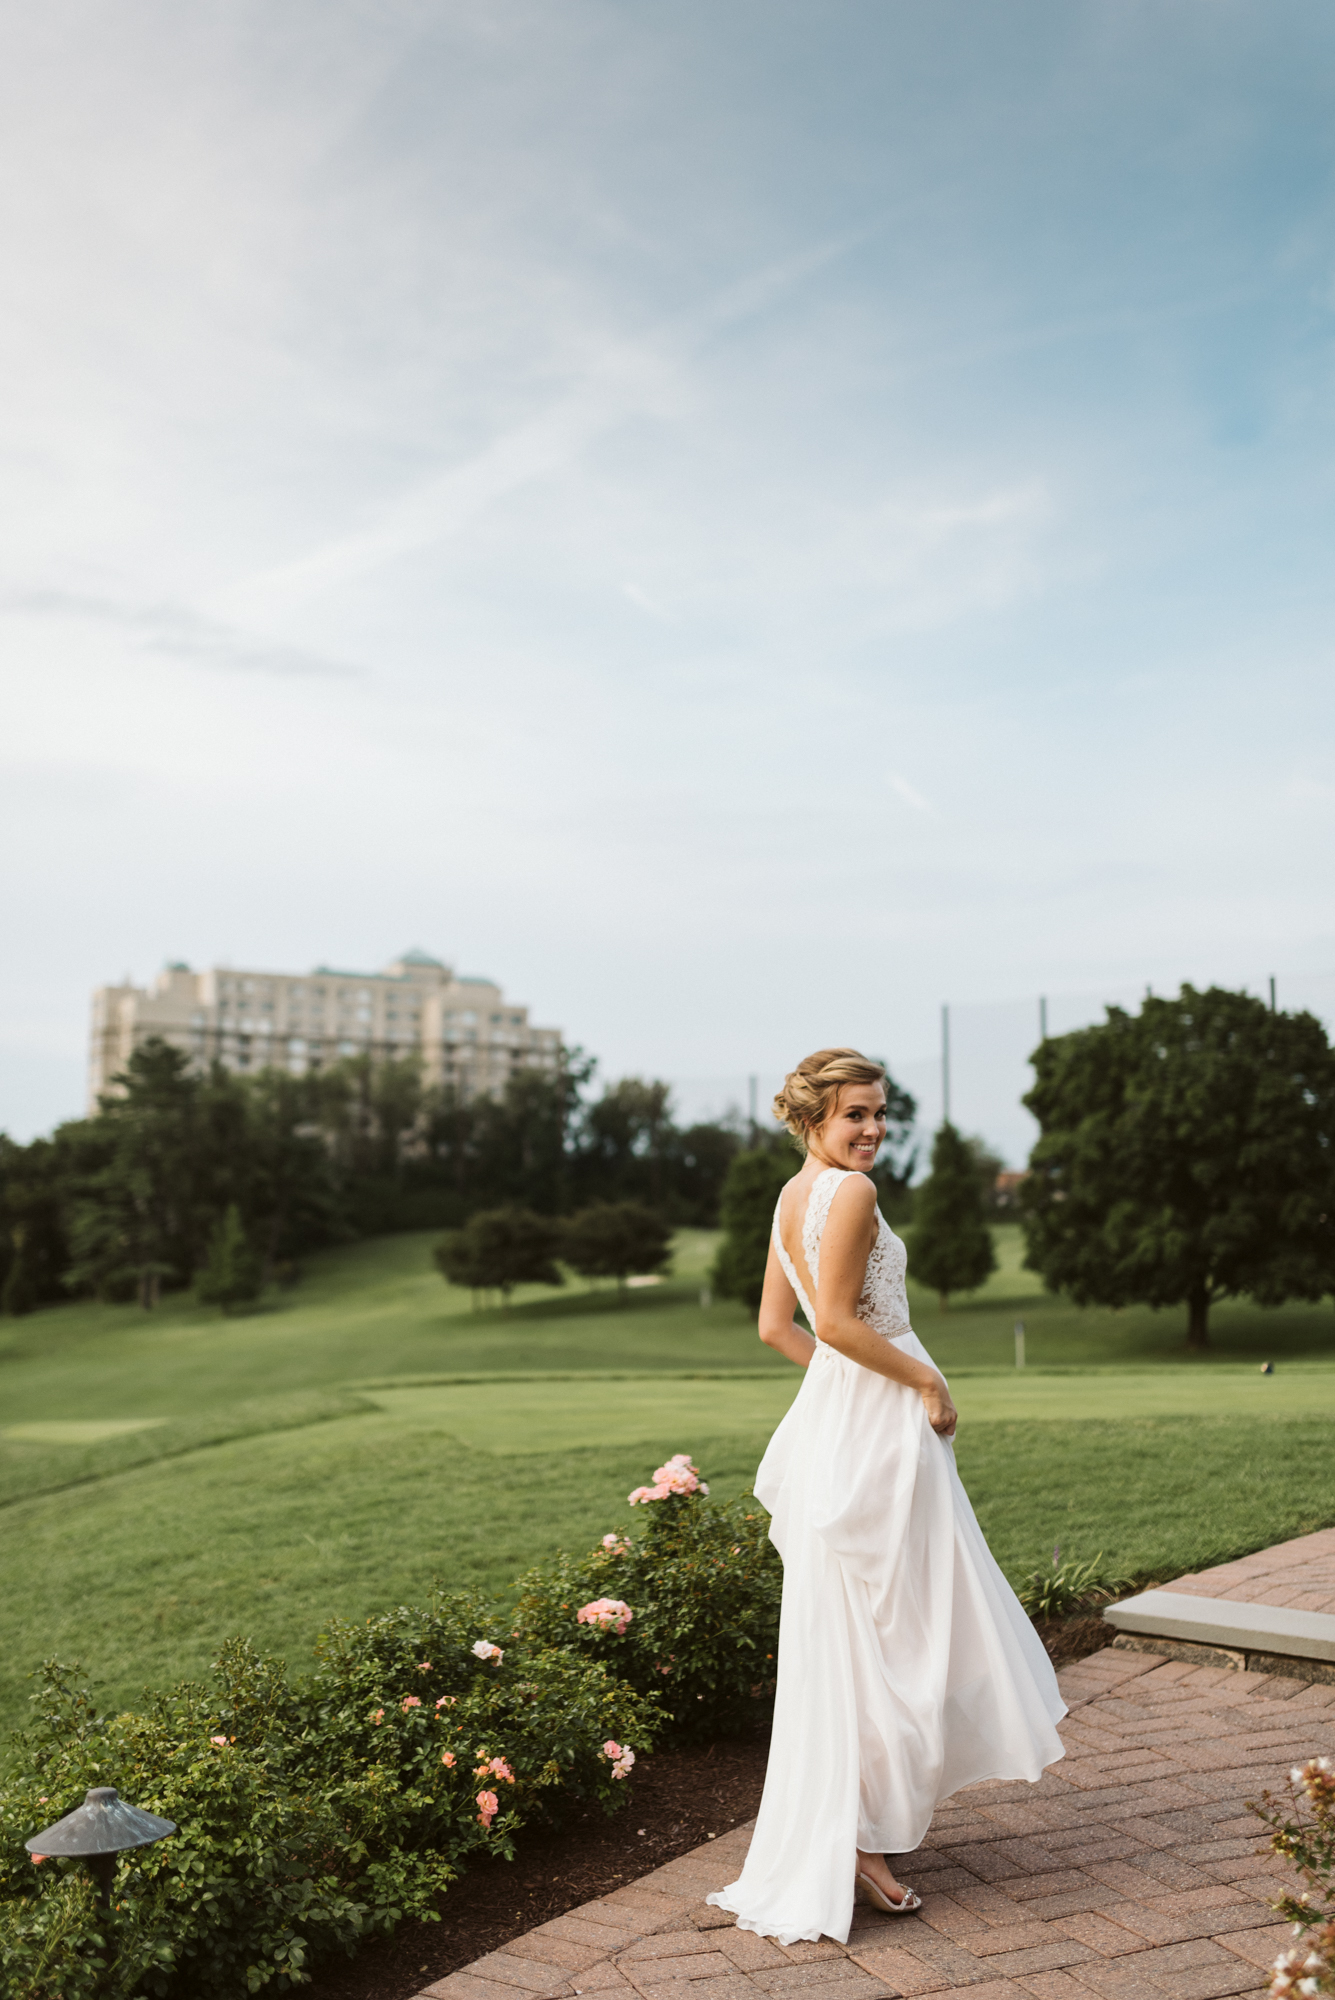 Elegant, Columbia Country Club, Chevy Chase Maryland, Baltimore Wedding Photographer, Classic, Traditional, Beautiful Bride Walking Down Path at Sunset, BHLDN Wedding Dress